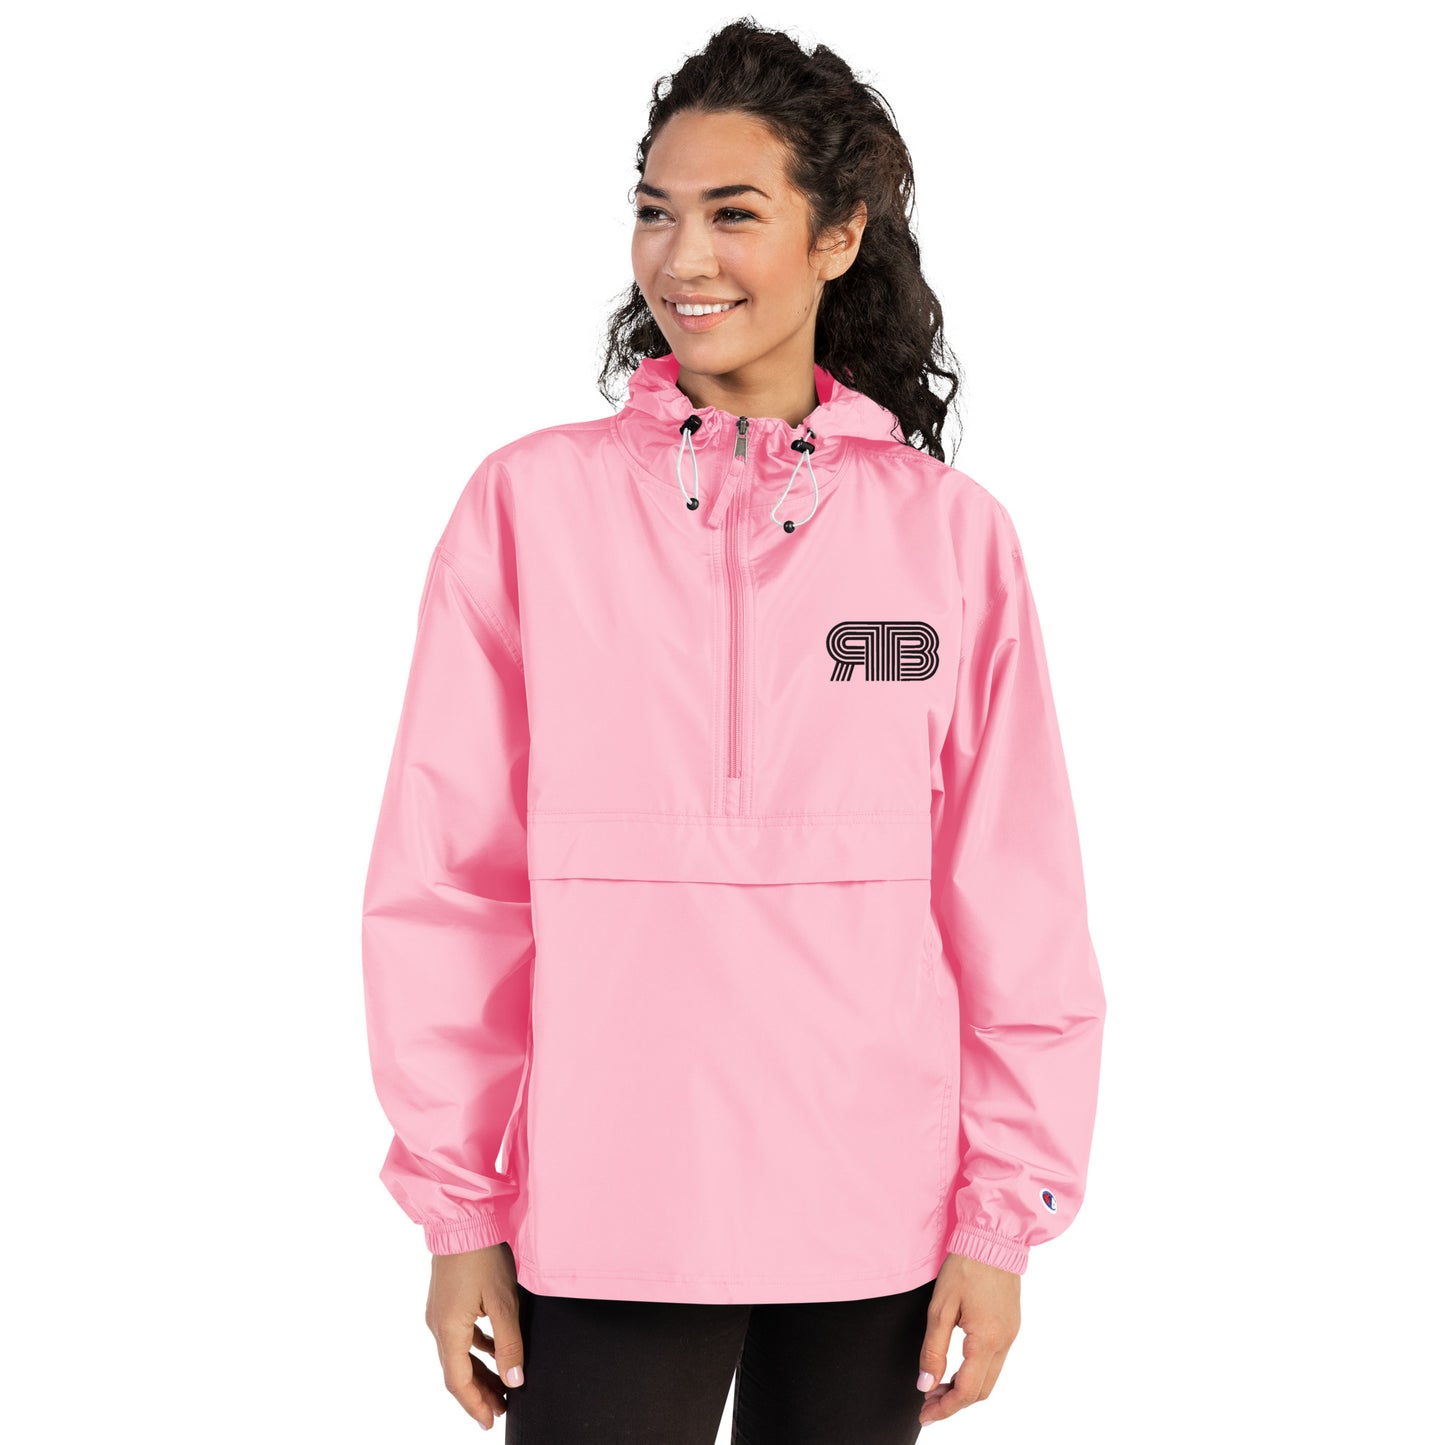 RB Champion Packable Jacket (Bright Pink)